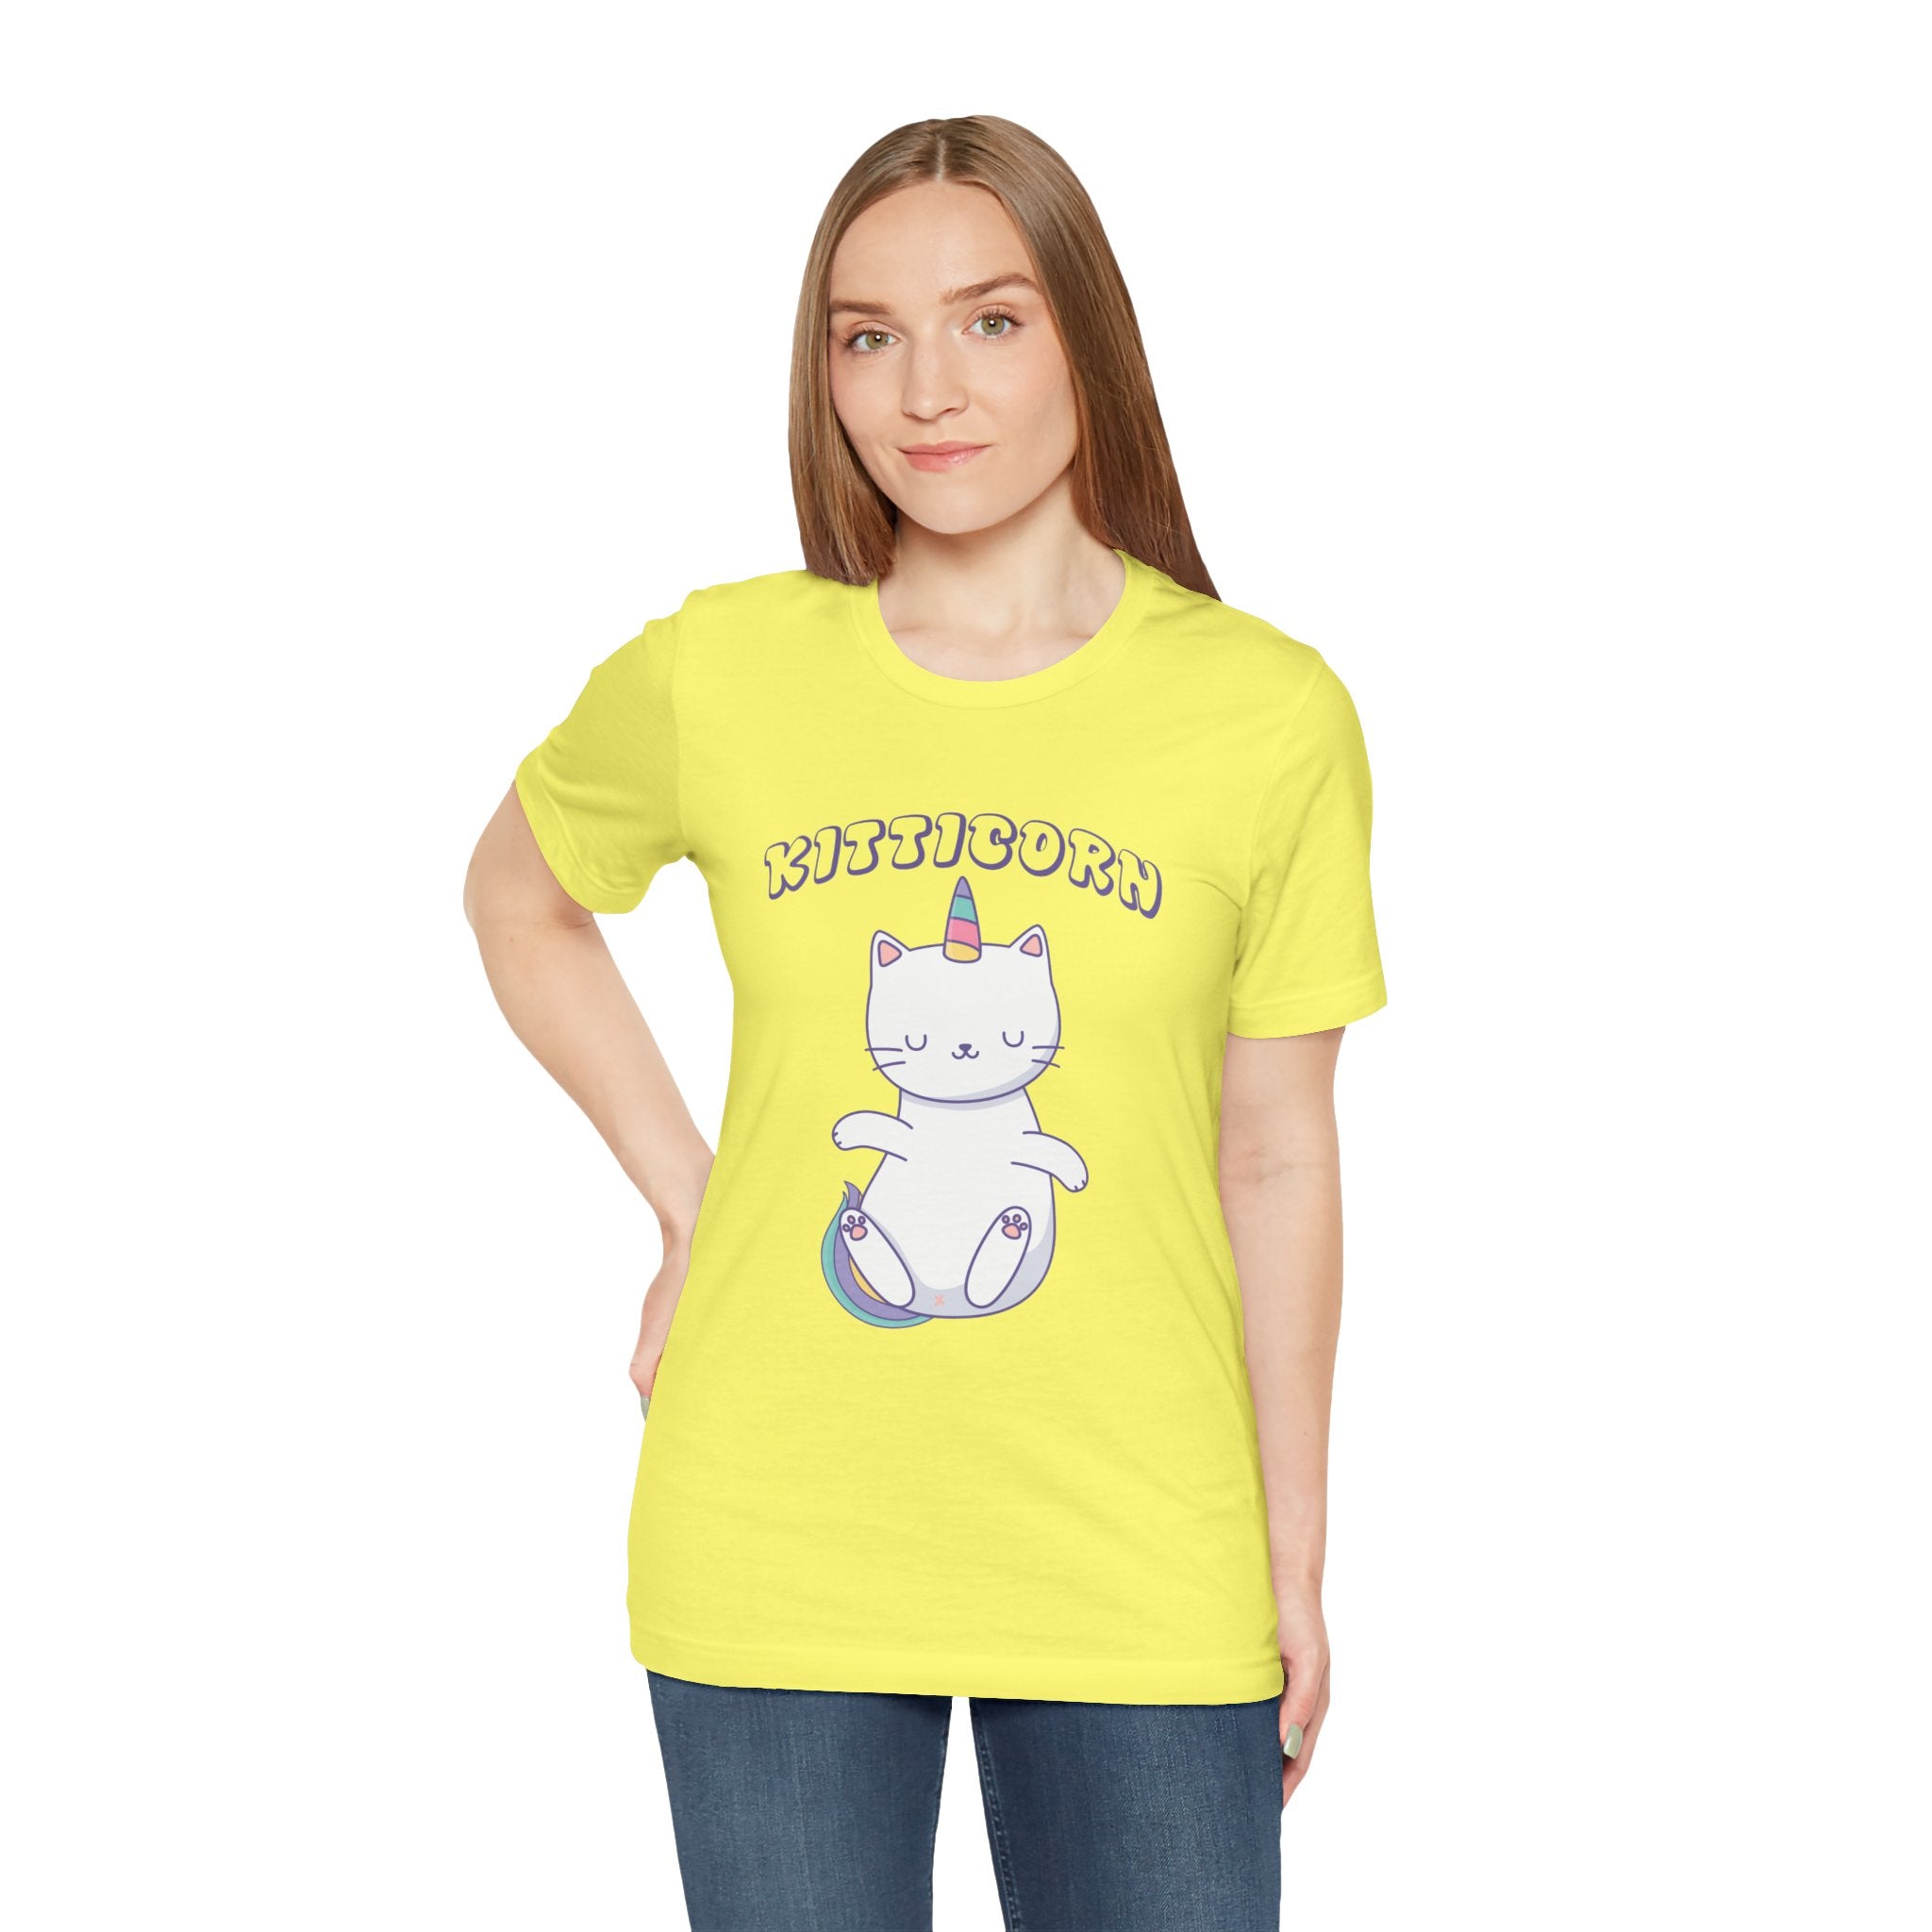 Woman in a yellow Kitticorn jersey tee with a cartoon unicorn cat design standing against a plain background.